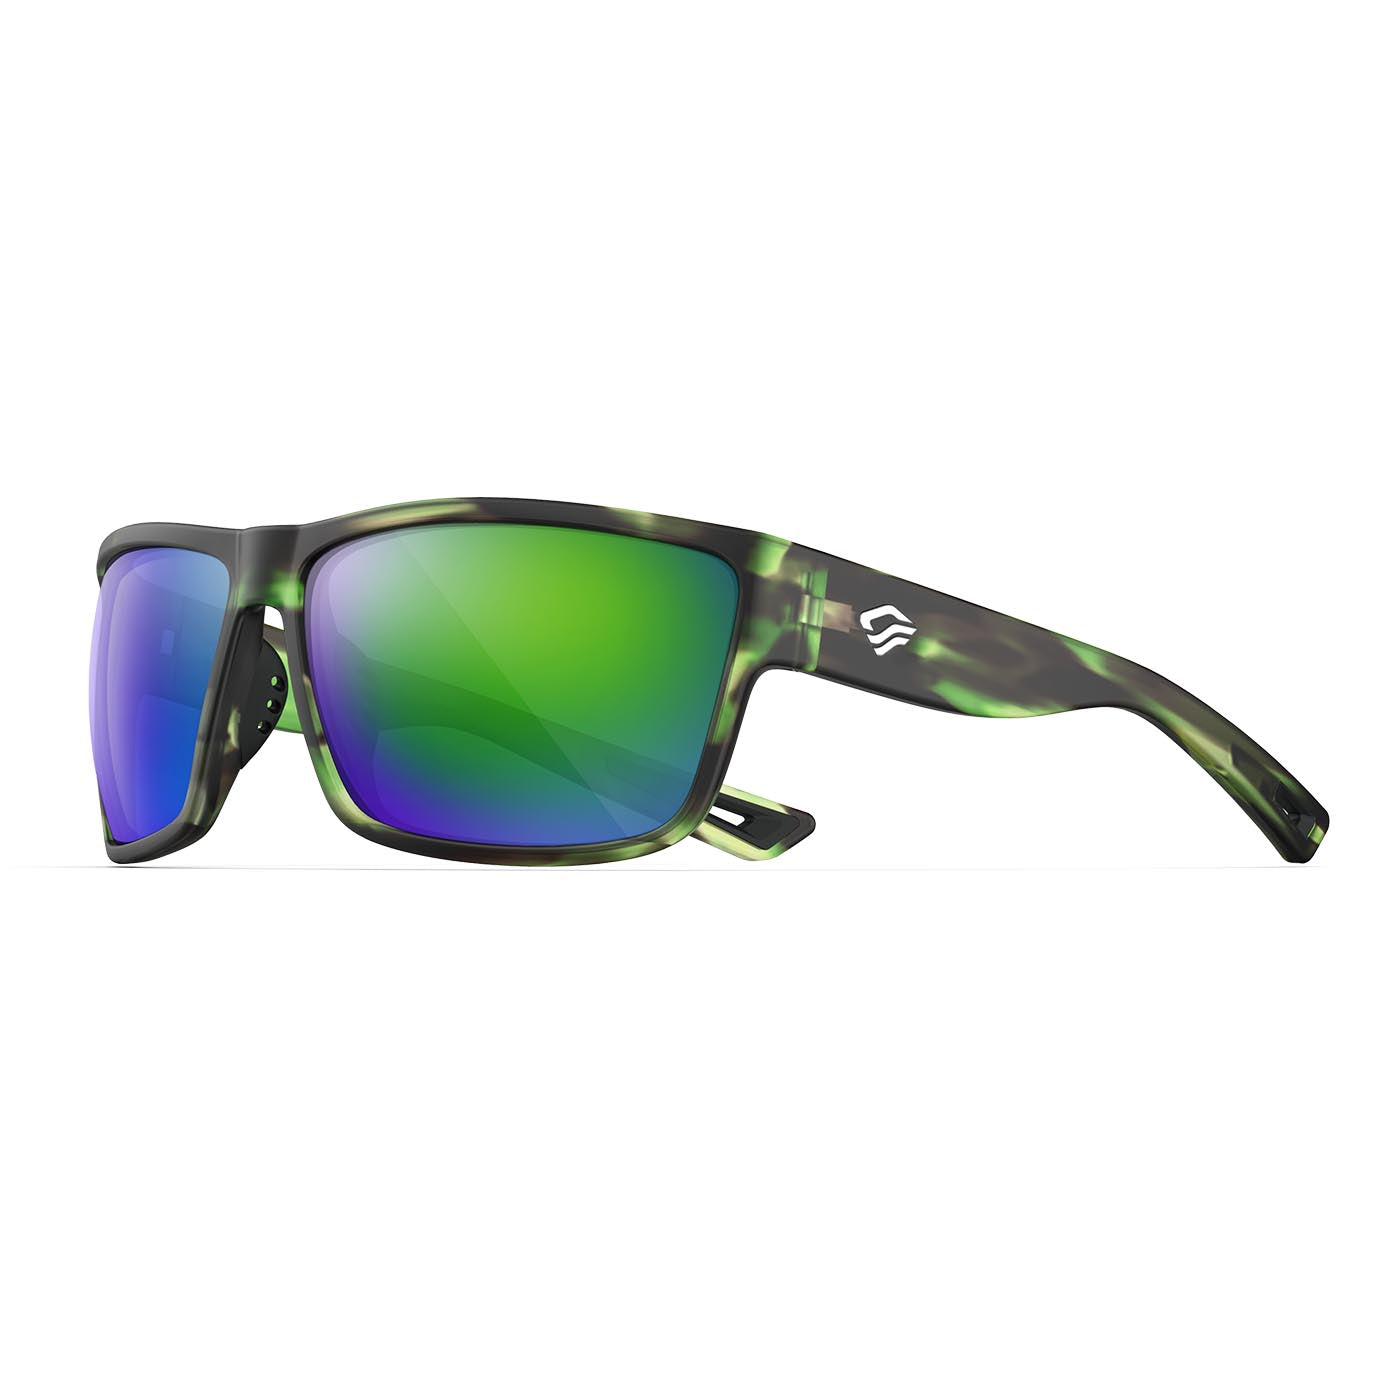 Torege 'Dreaminess' Polarized Sports Sunglasses with Lifetime Warranty - Adjustable and Flexible Frame - Ideal for Cycling, Running, Golf, and Fishing